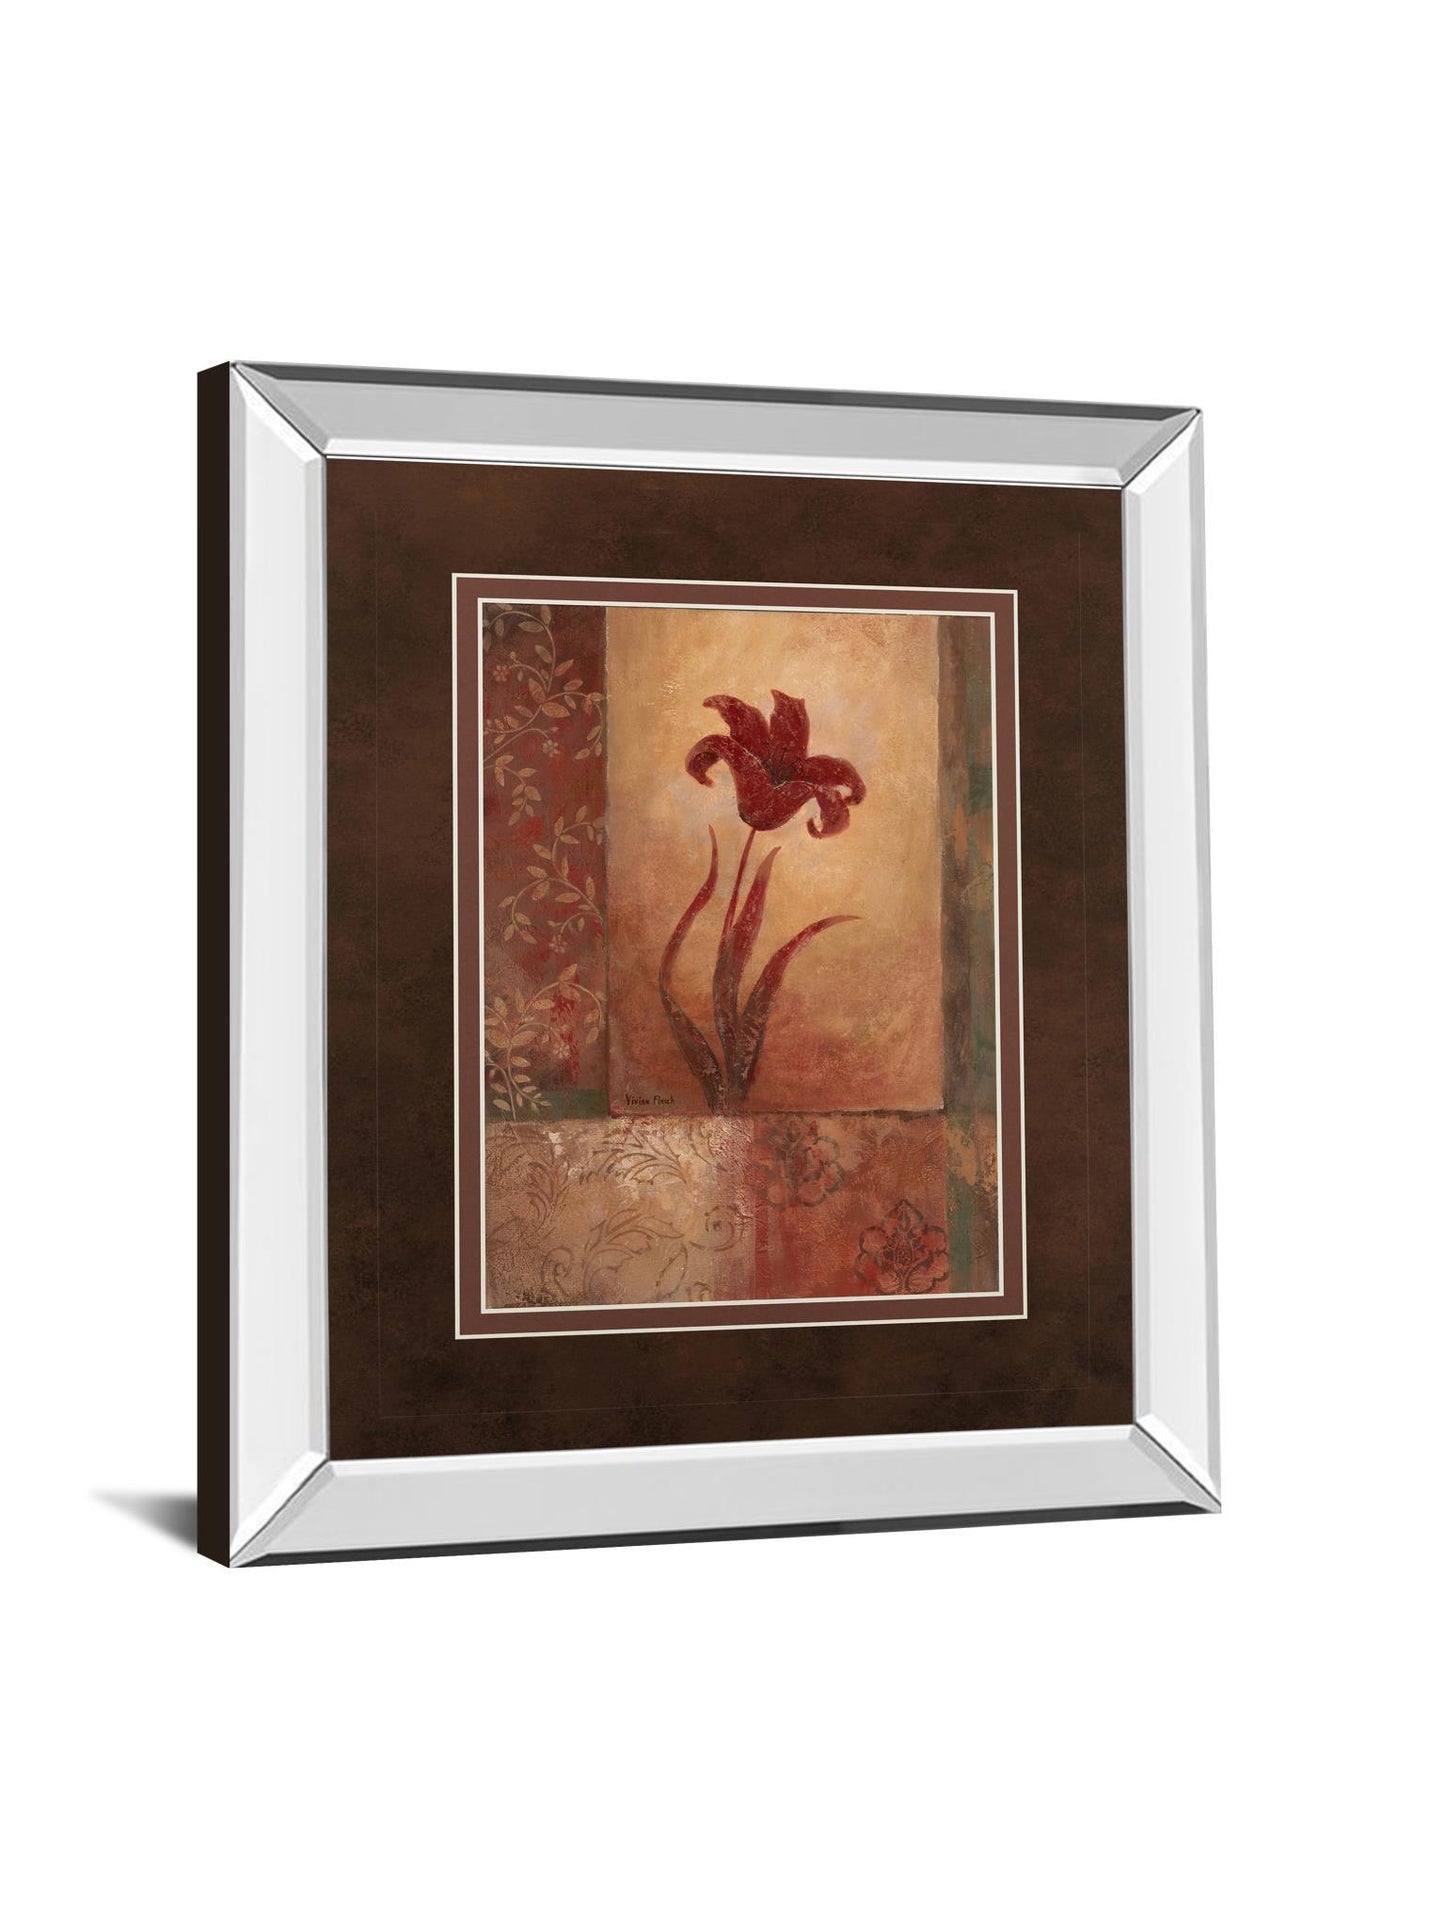 Lily Silhouette By Vivian Flasch - Mirror Framed Print Wall Art - Red